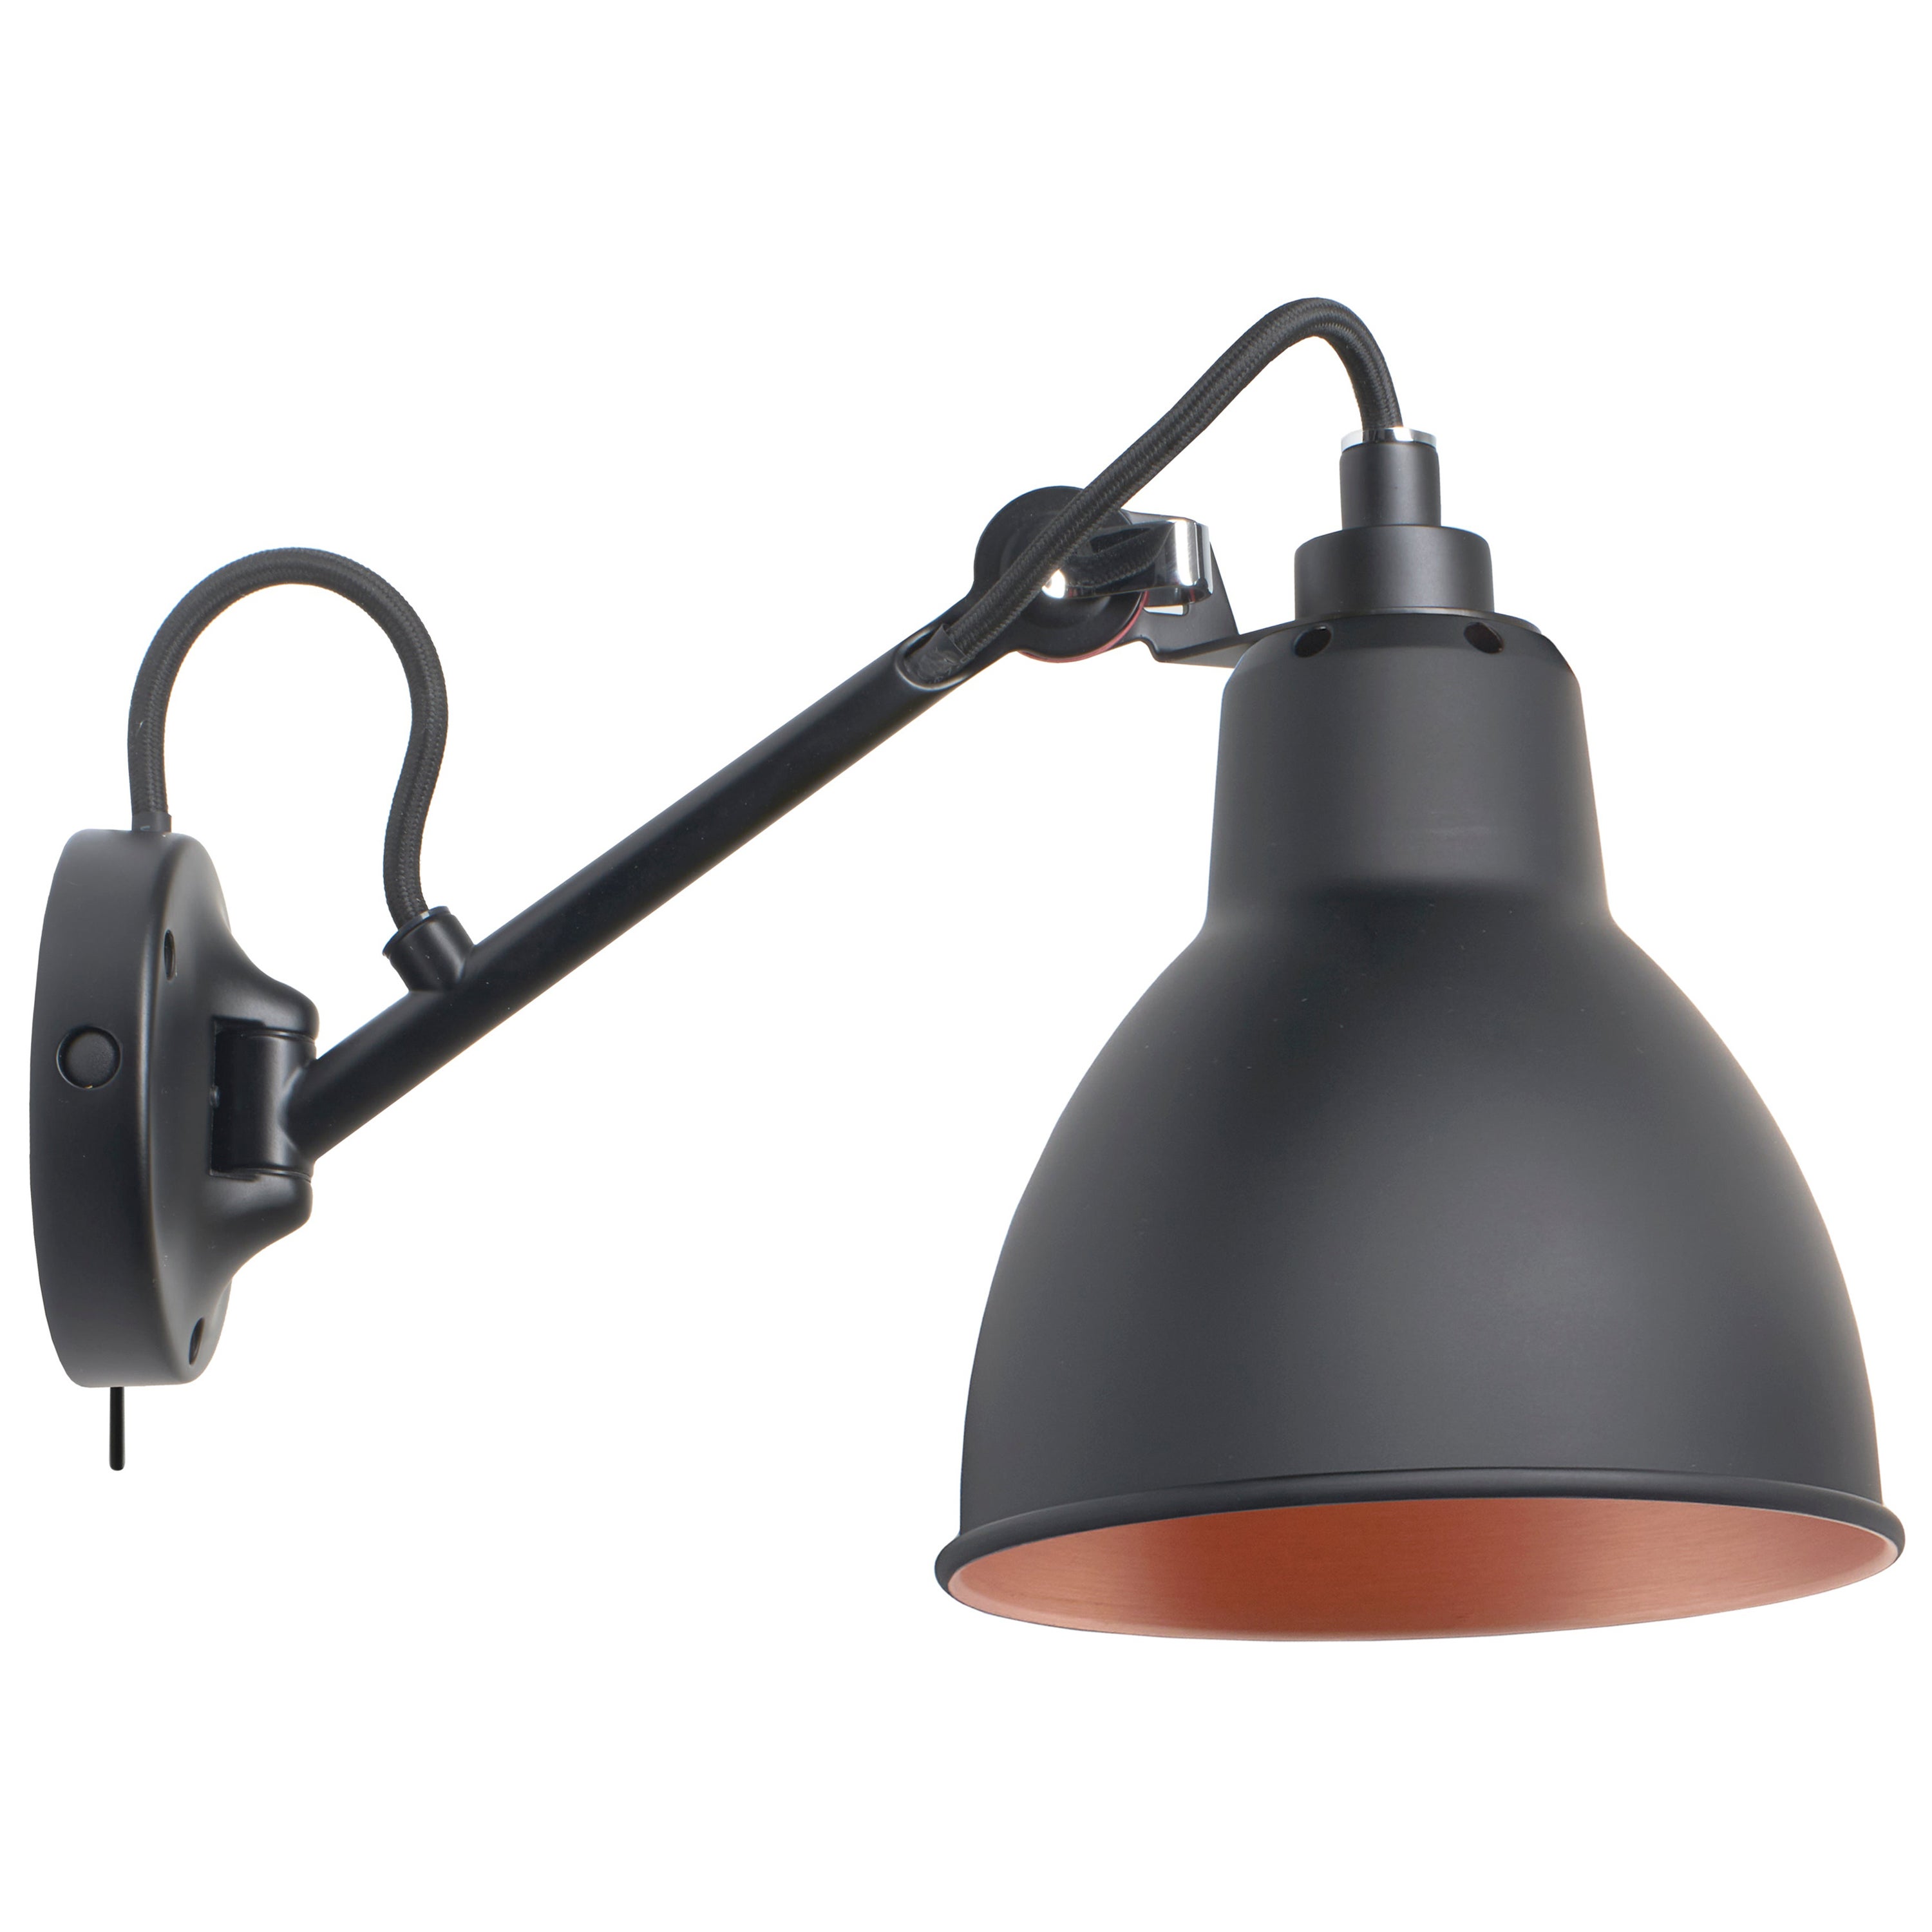 DCW Editions La Lampe Gras N°104 SW Wall Lamp in Black Arm & Black Copper Shade For Sale